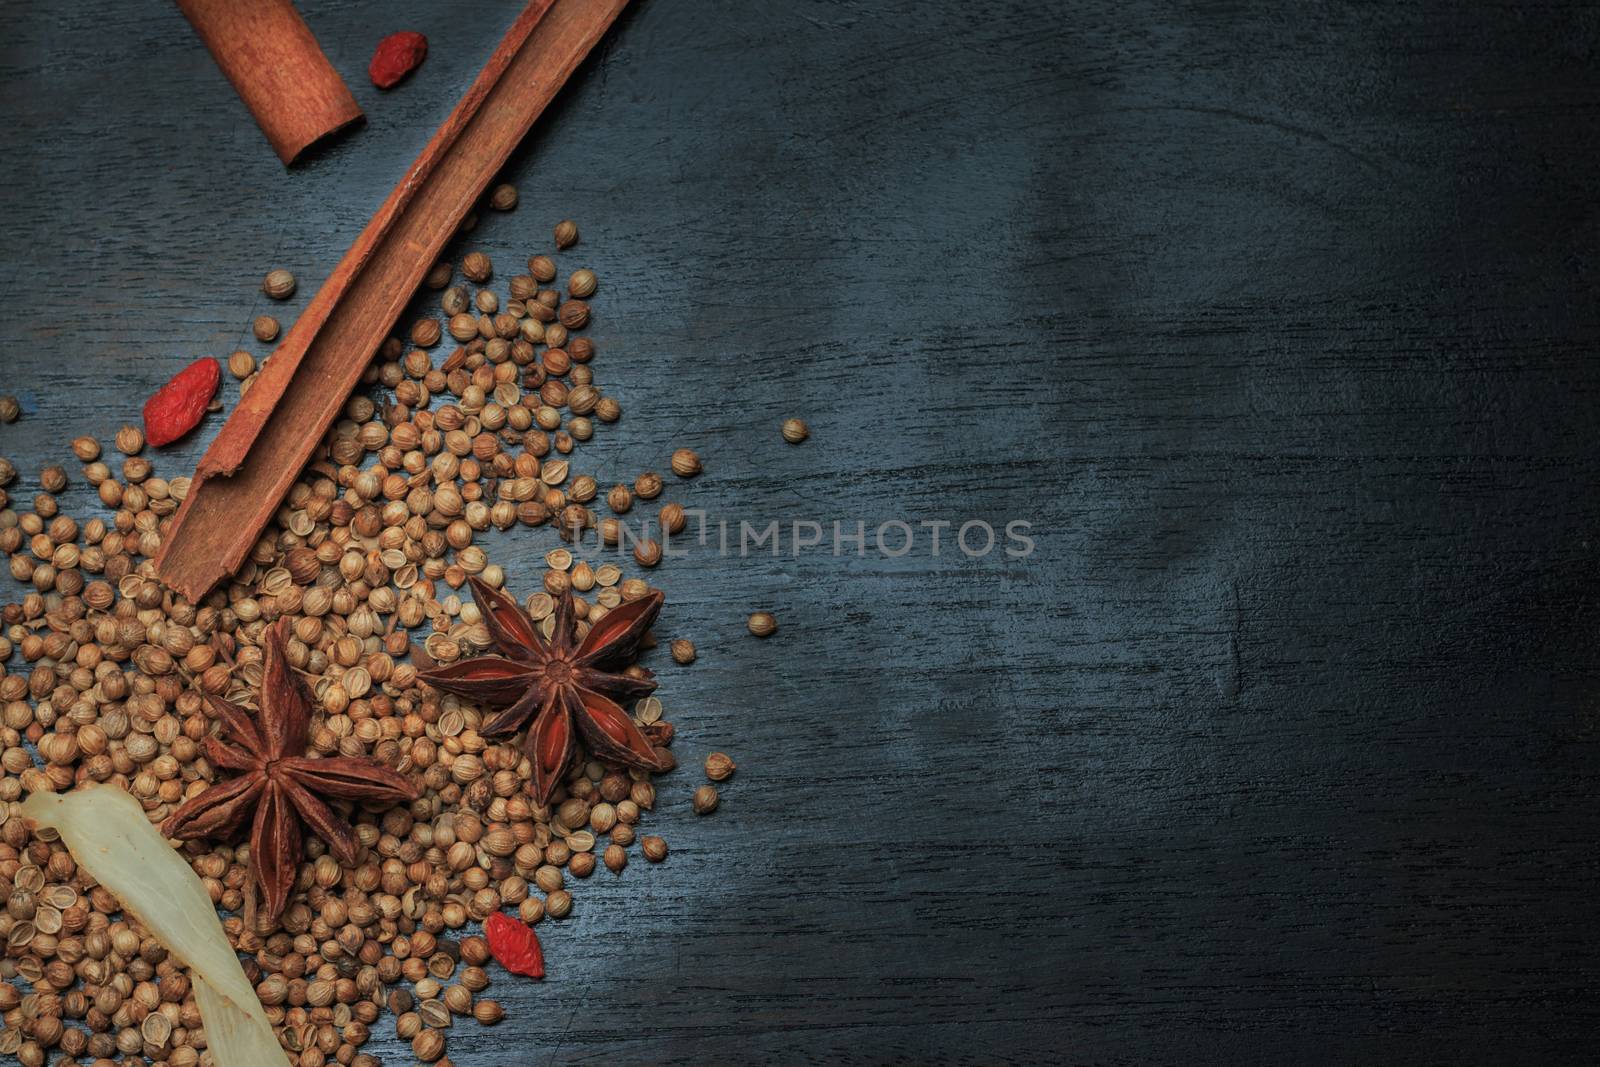 Spices and herbs by AEyZRiO